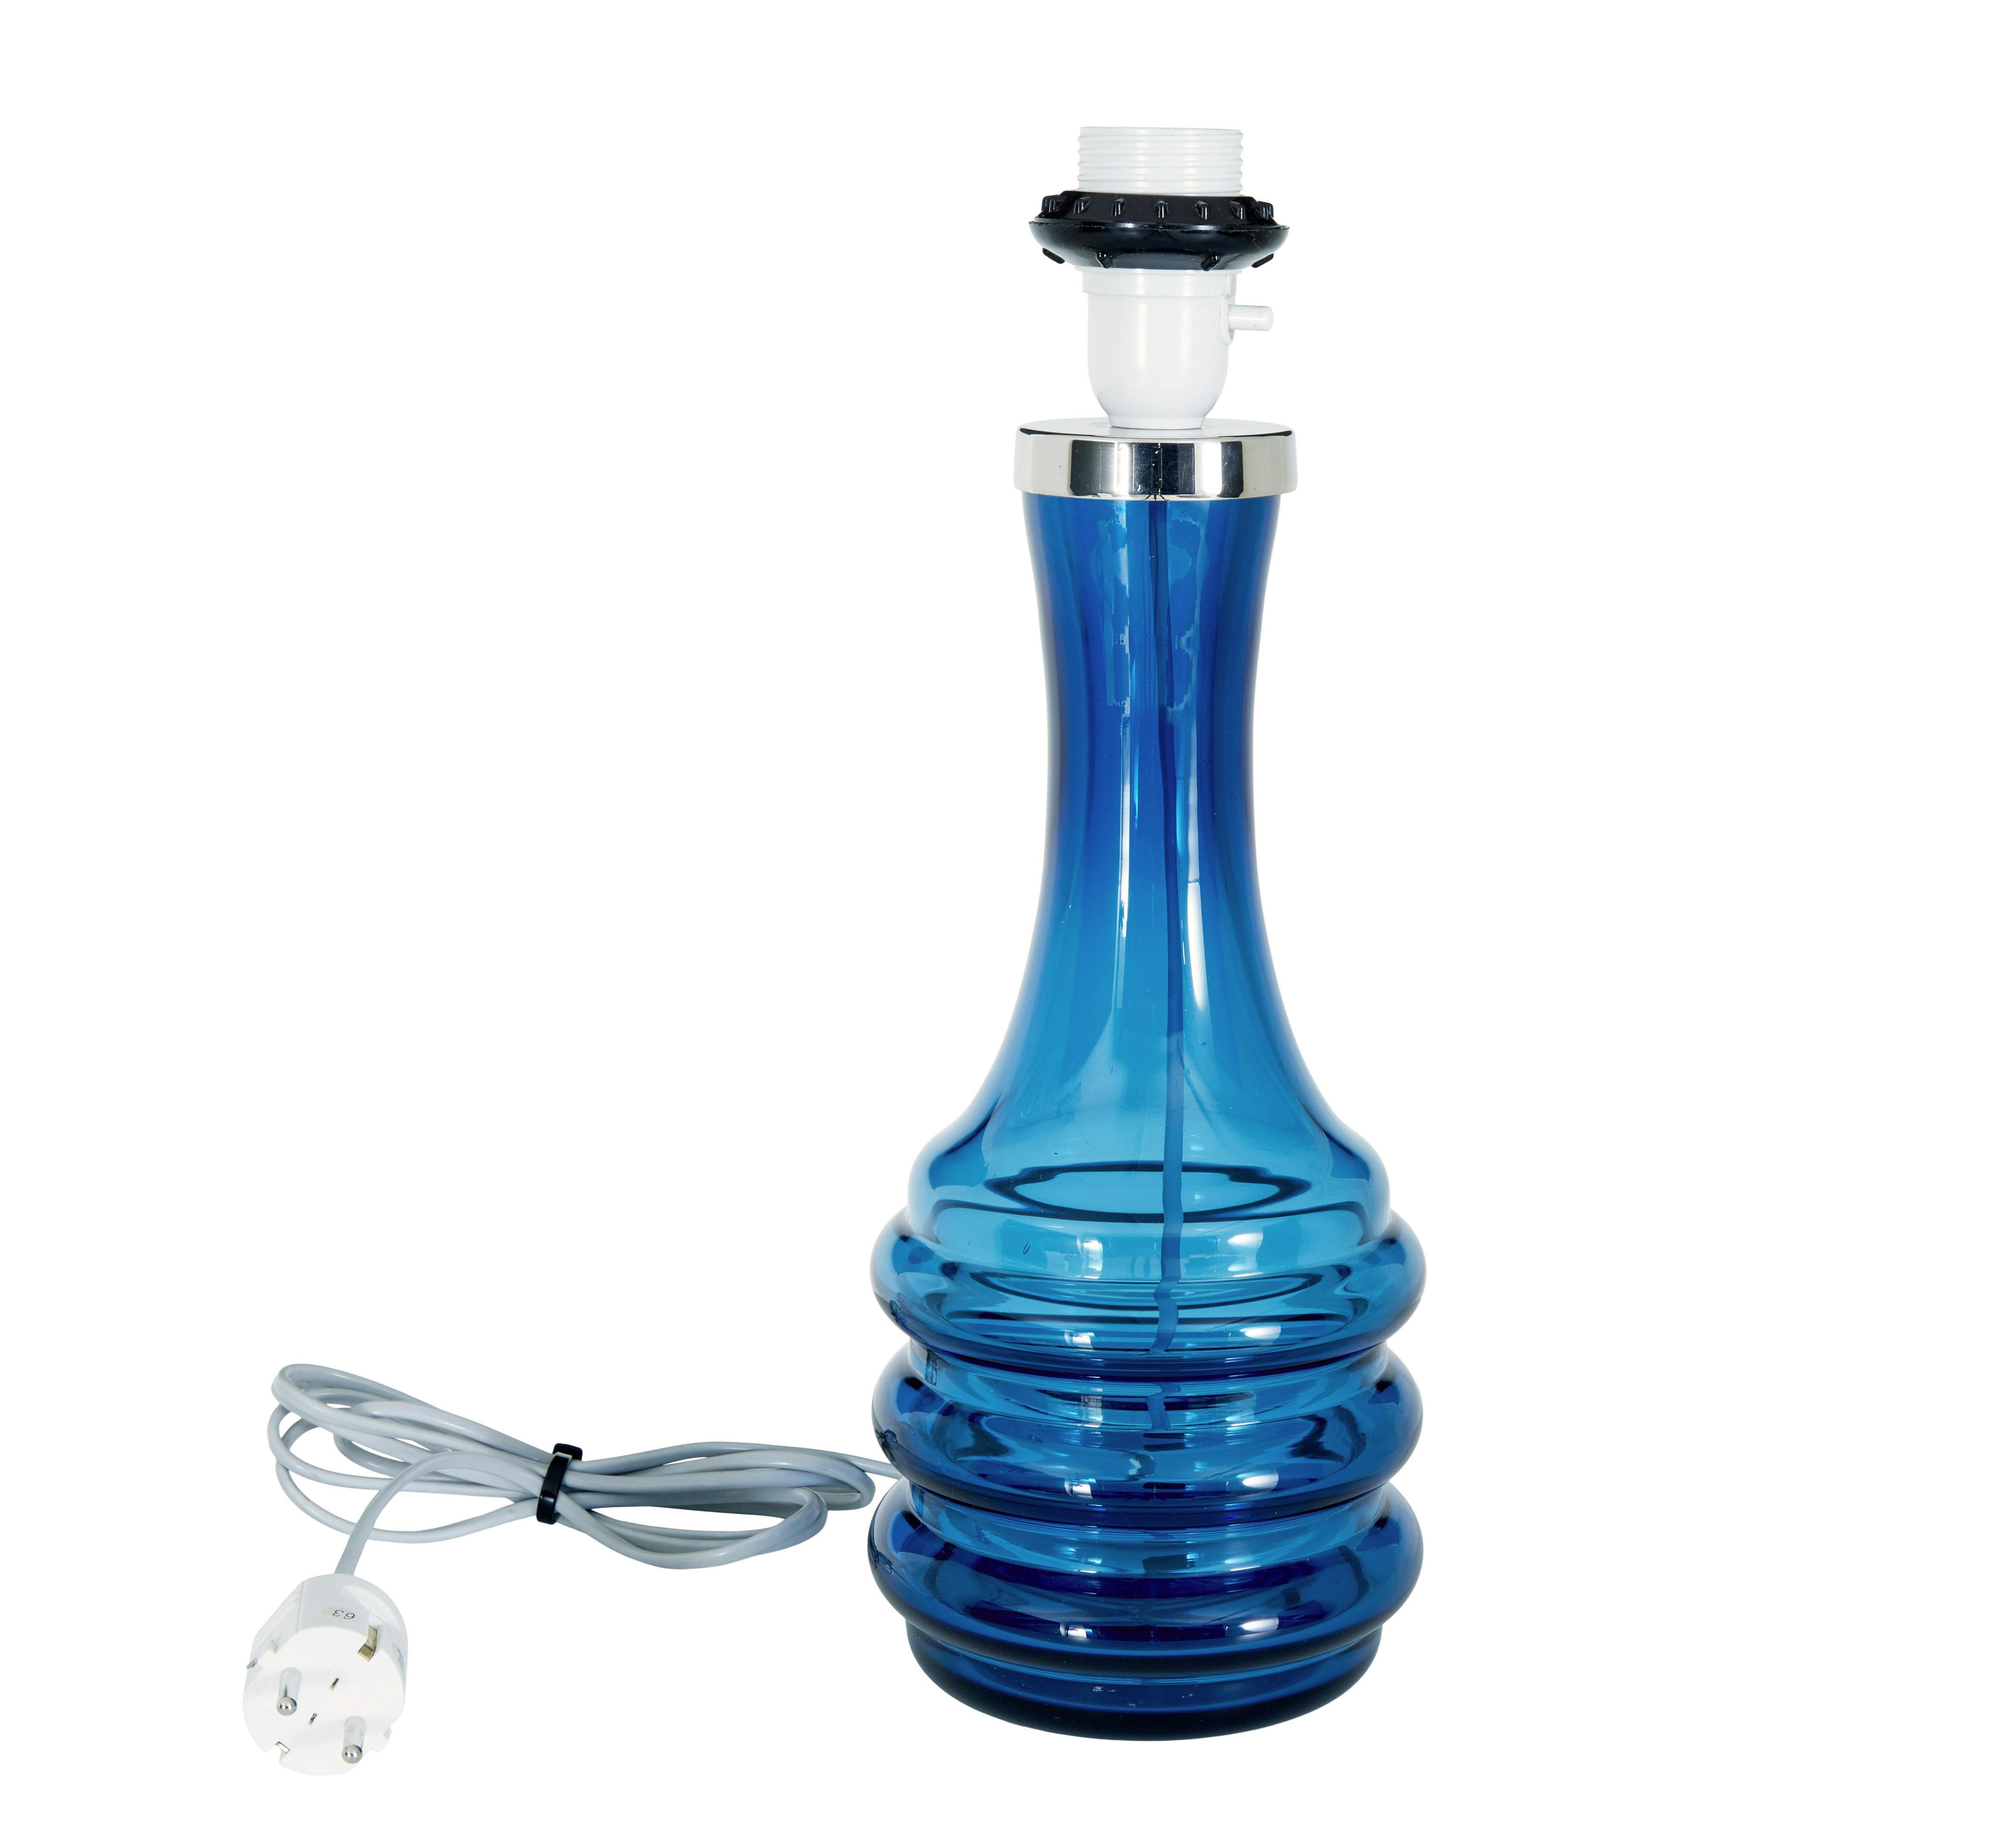 20th century coloured glass Orrefors lamp circa 1970.

Stunning glass lamp from the well known Swedish makers of fine glass, Orrefors.  Screw thread bulb holder, with a chrome collar beneath which has the makers name etched onto it.  Deep blue glass